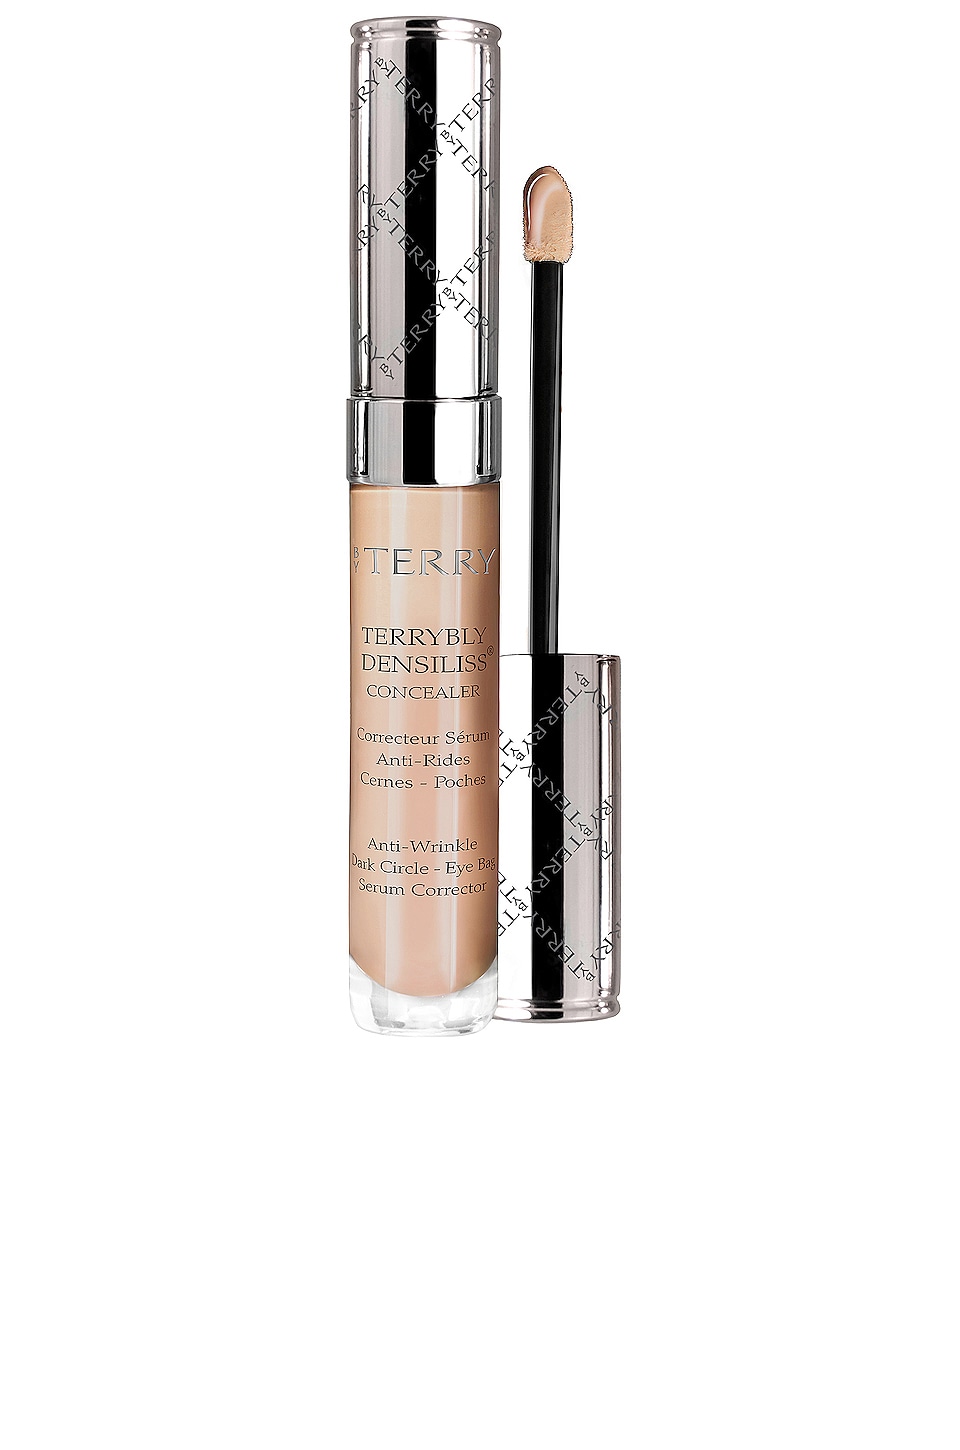 Консилер By Terry Terrybly Densiliss, цвет Desert Beige by terry mascara terrybly